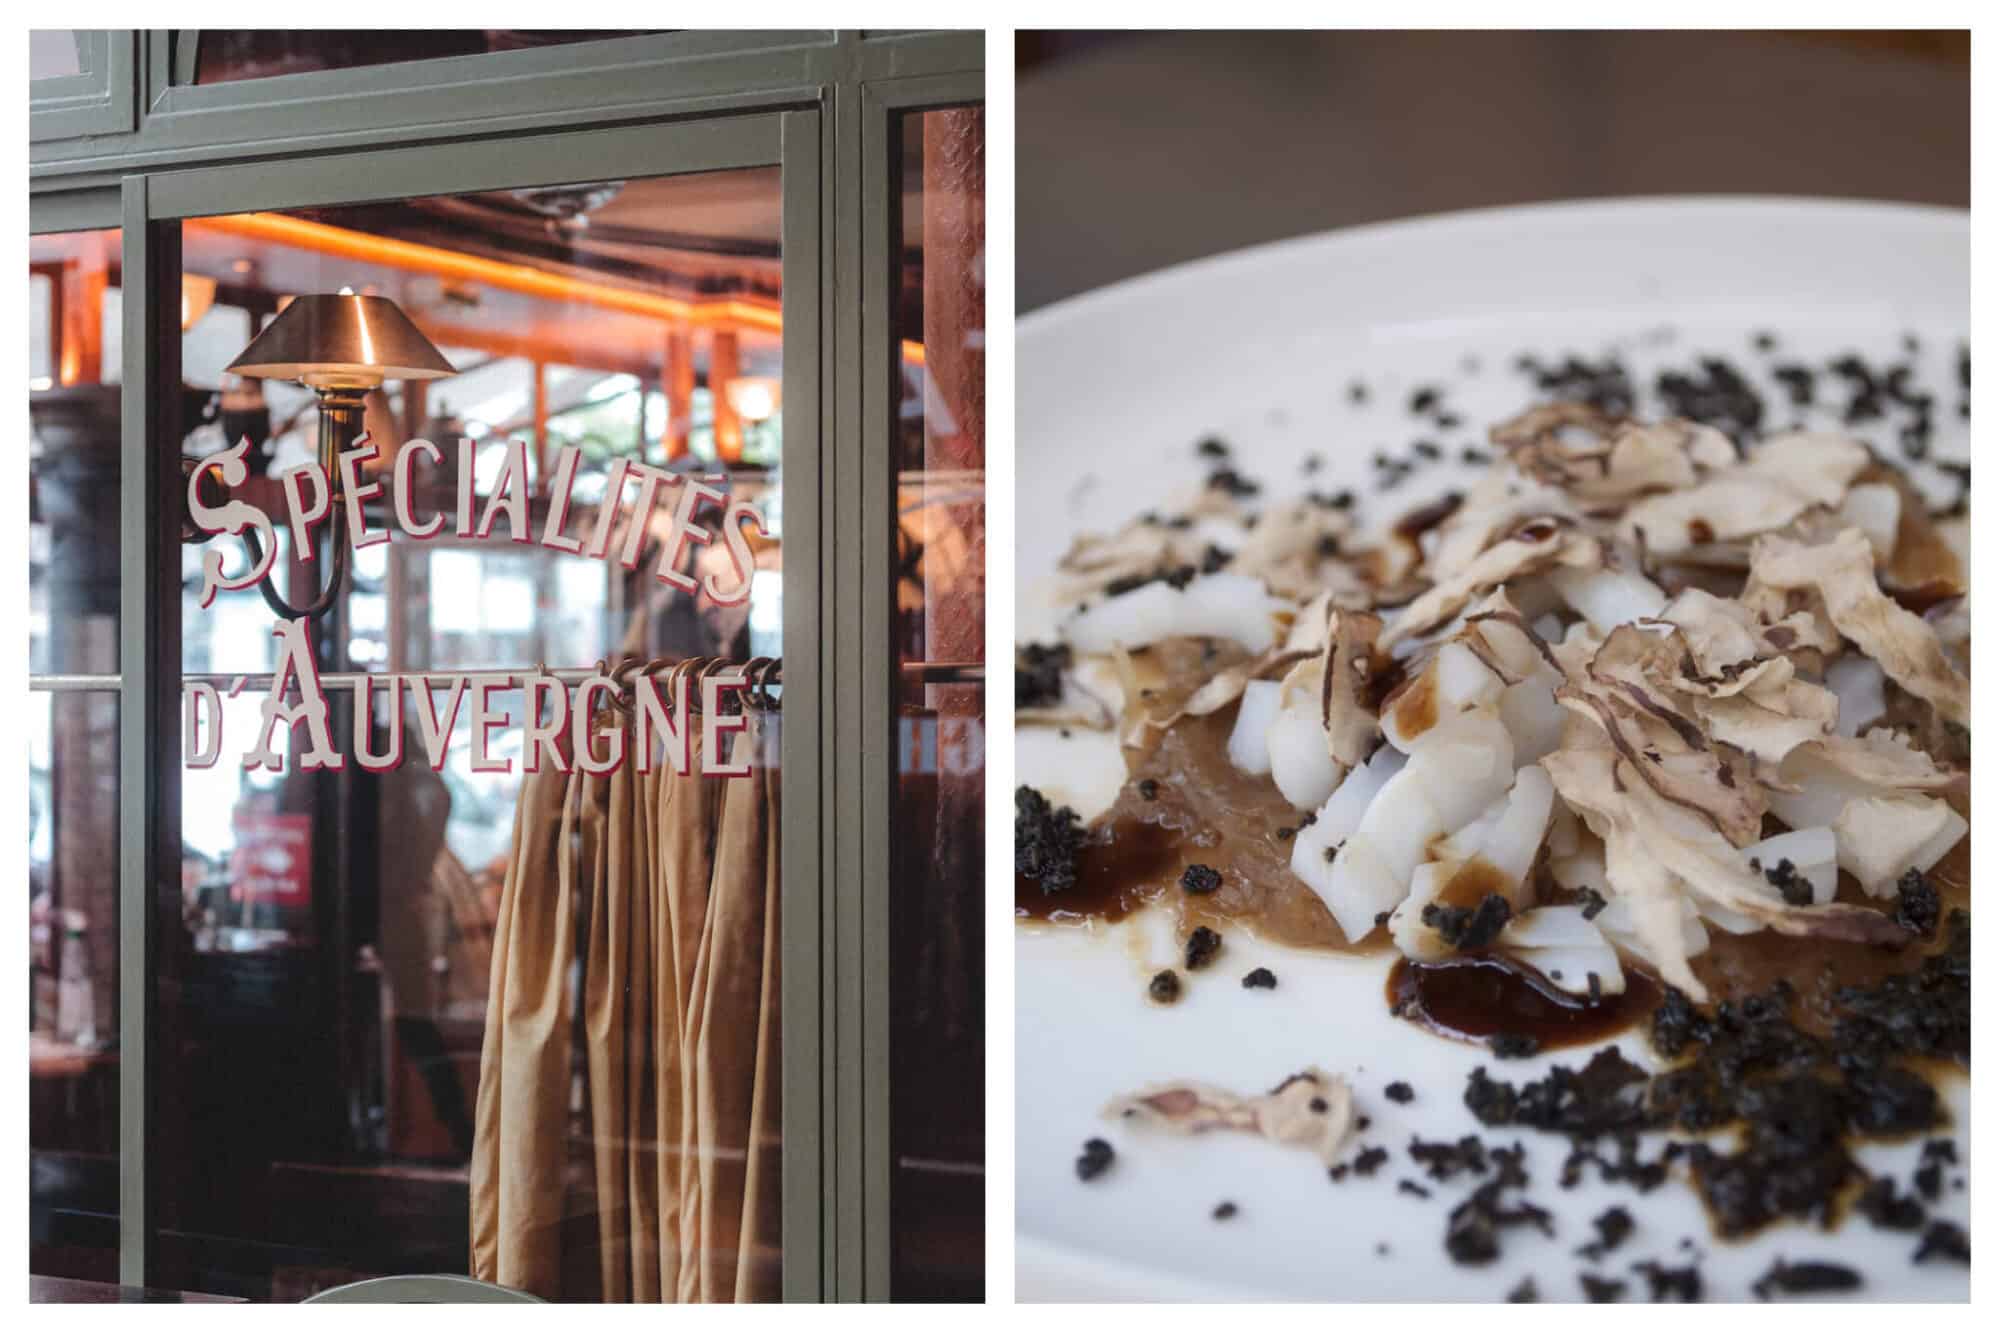 Left: "Spécialités d'Auvergne" is written in red and white paint on the glass window of a restaurant in Paris, Right: An array of mushrooms, sauces and seasonings lays on a white plate